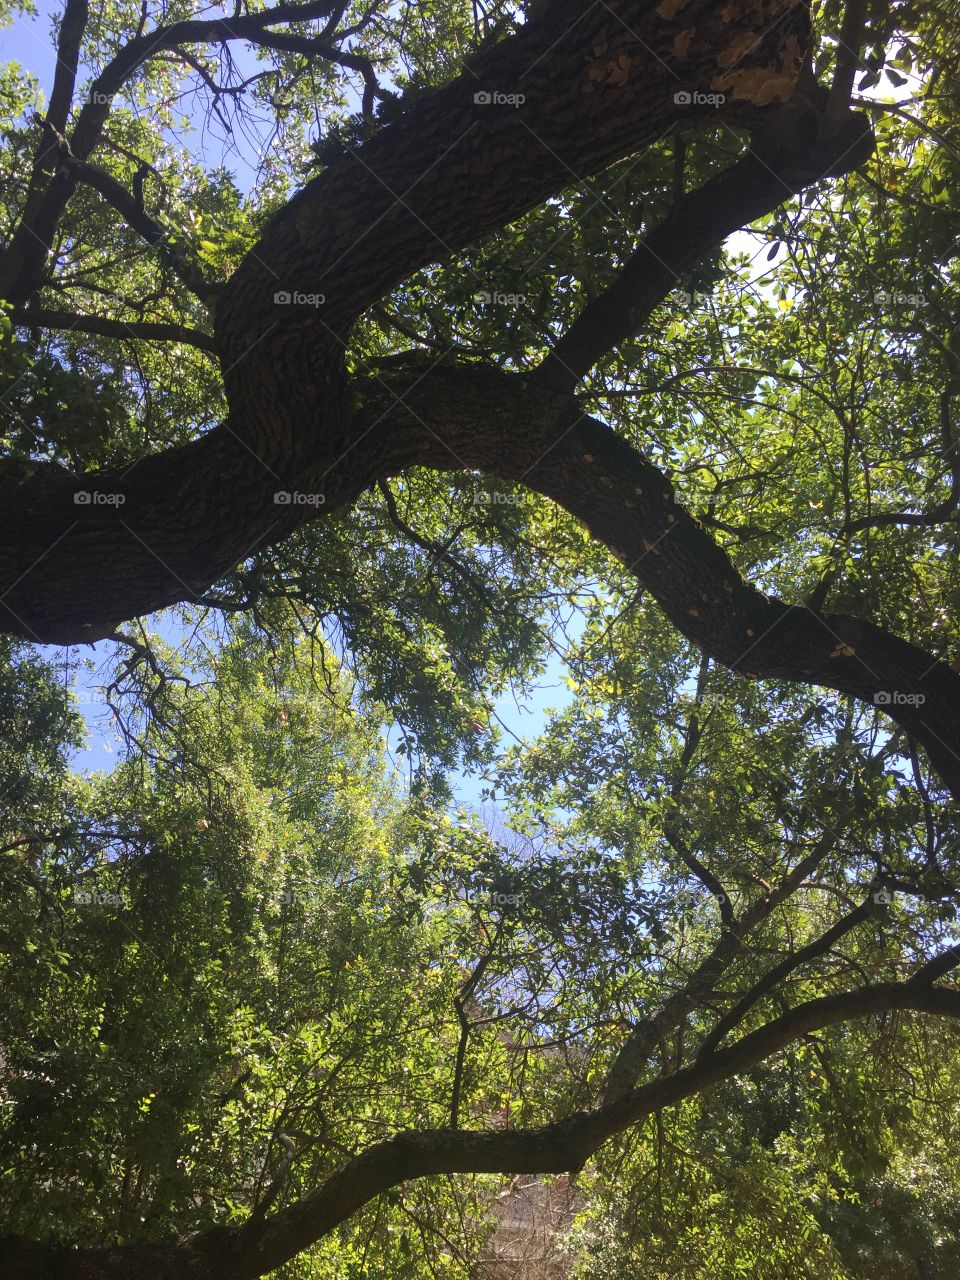 Trees in New Orleans, green lush summer 